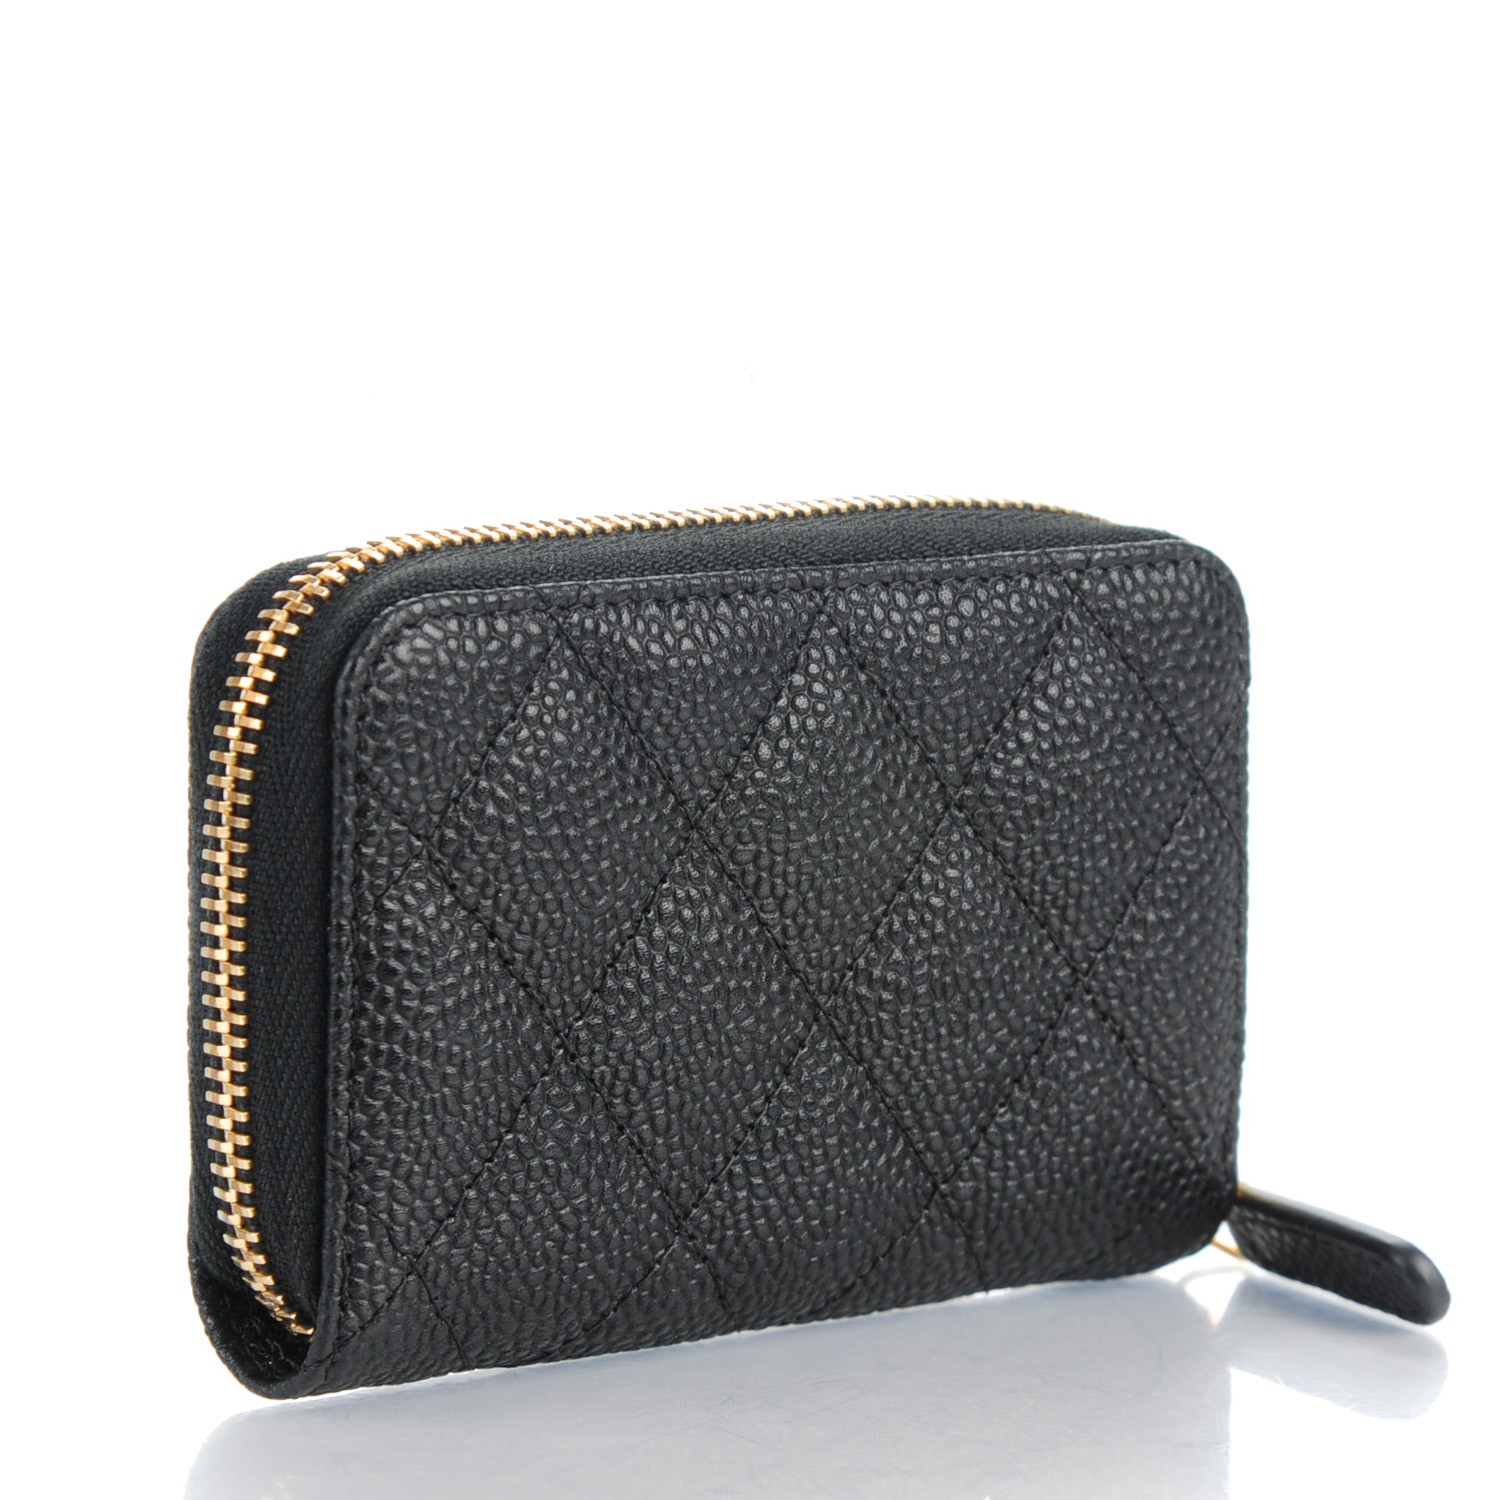 CHANEL Caviar Quilted Zip Coin Purse Black 144959